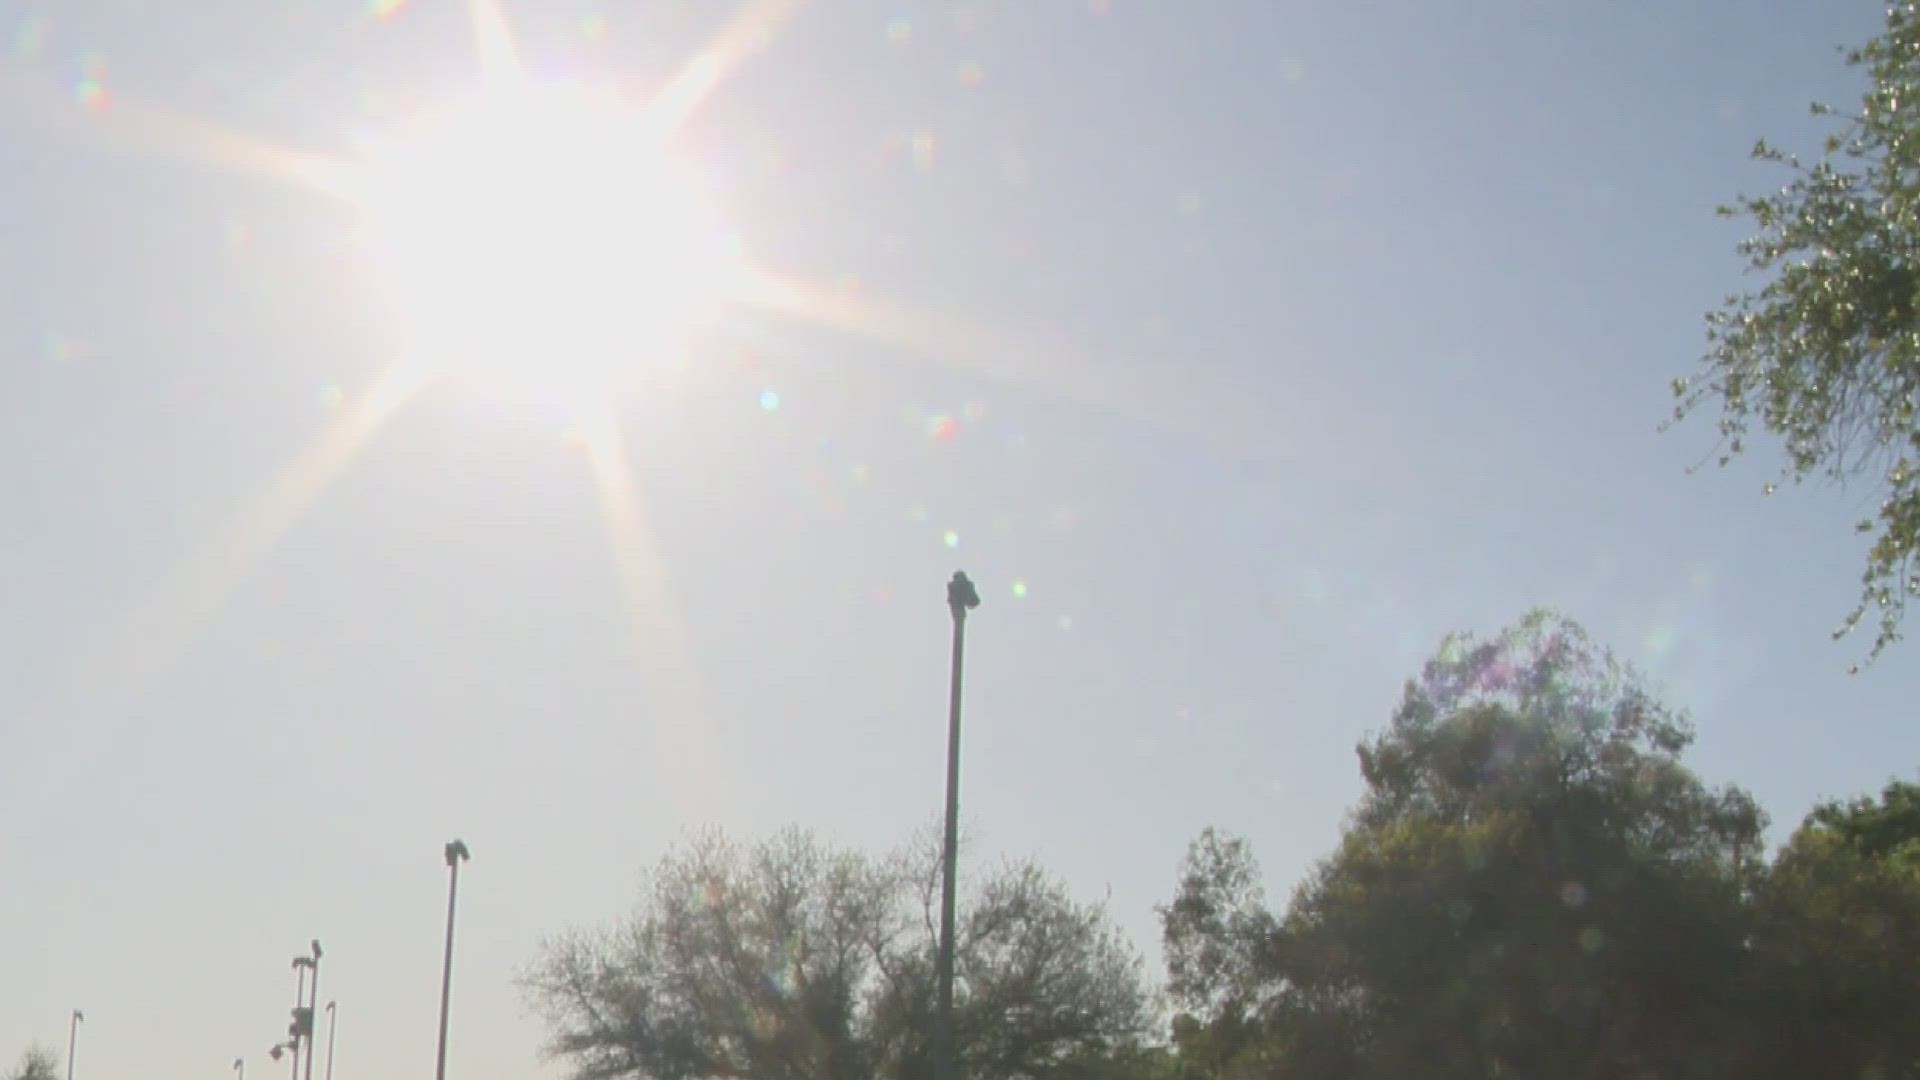 The Valley is expecting temperatures to hit triple digits this week.